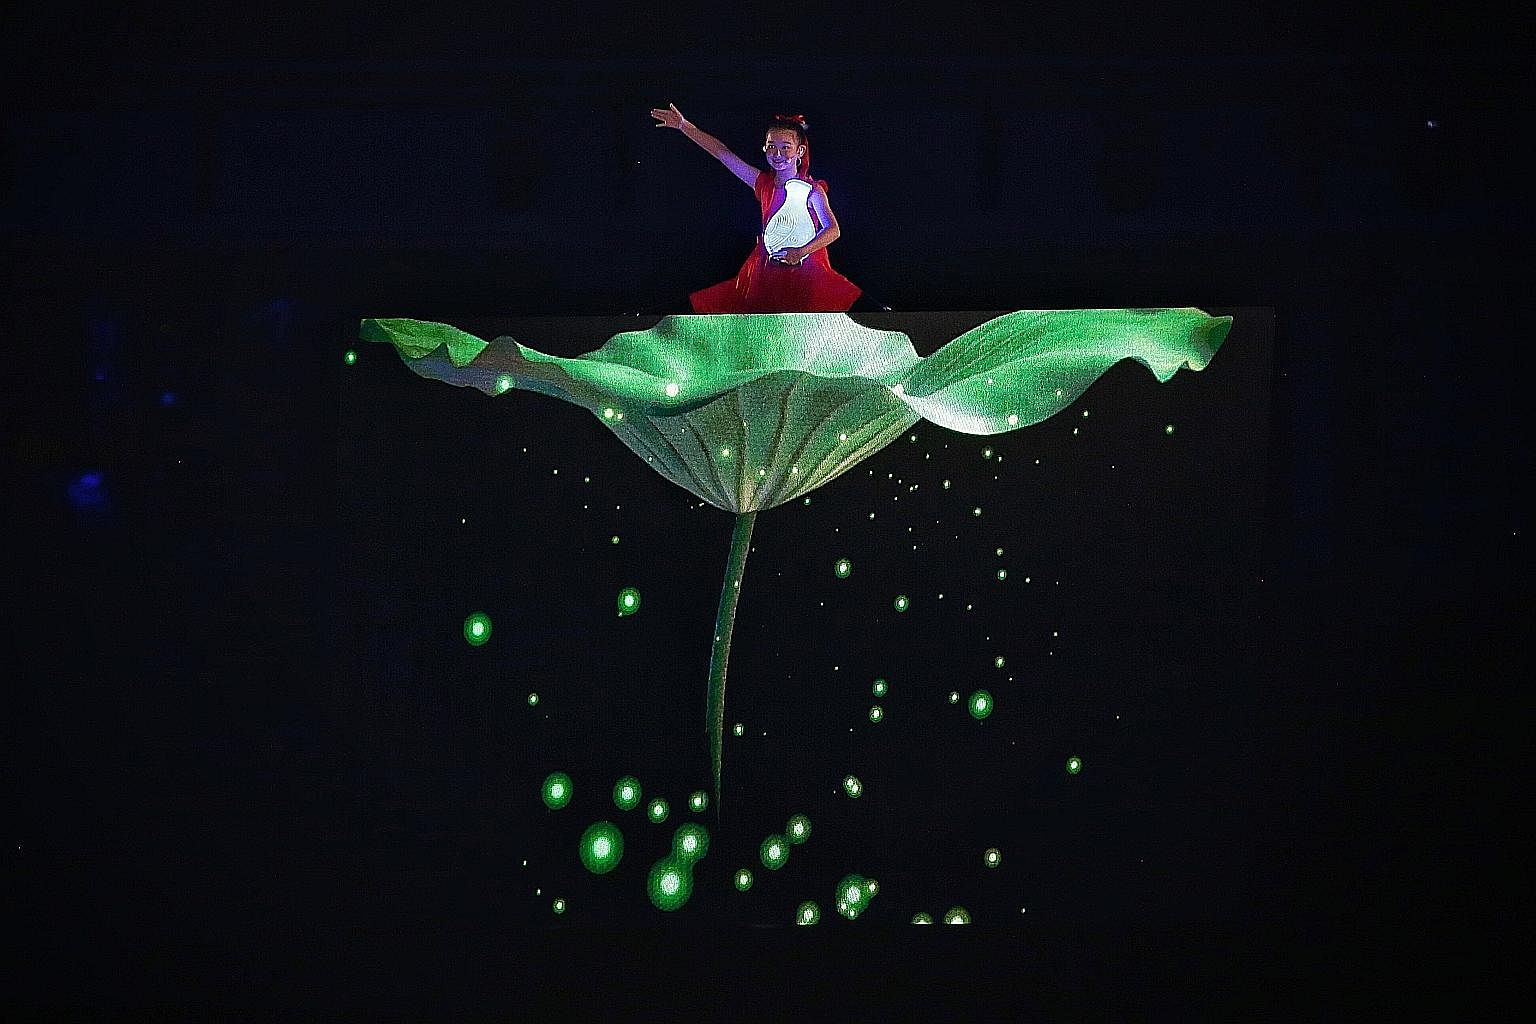 A young performer rises above the crowd with the announcement of Hangzhou as the host of the 2022 Asian Games during the closing ceremony of the 18th Asian Games in Jakarta. Thousands of athletes in ponchos marched in heavy rain at Gelora Bung Karno 